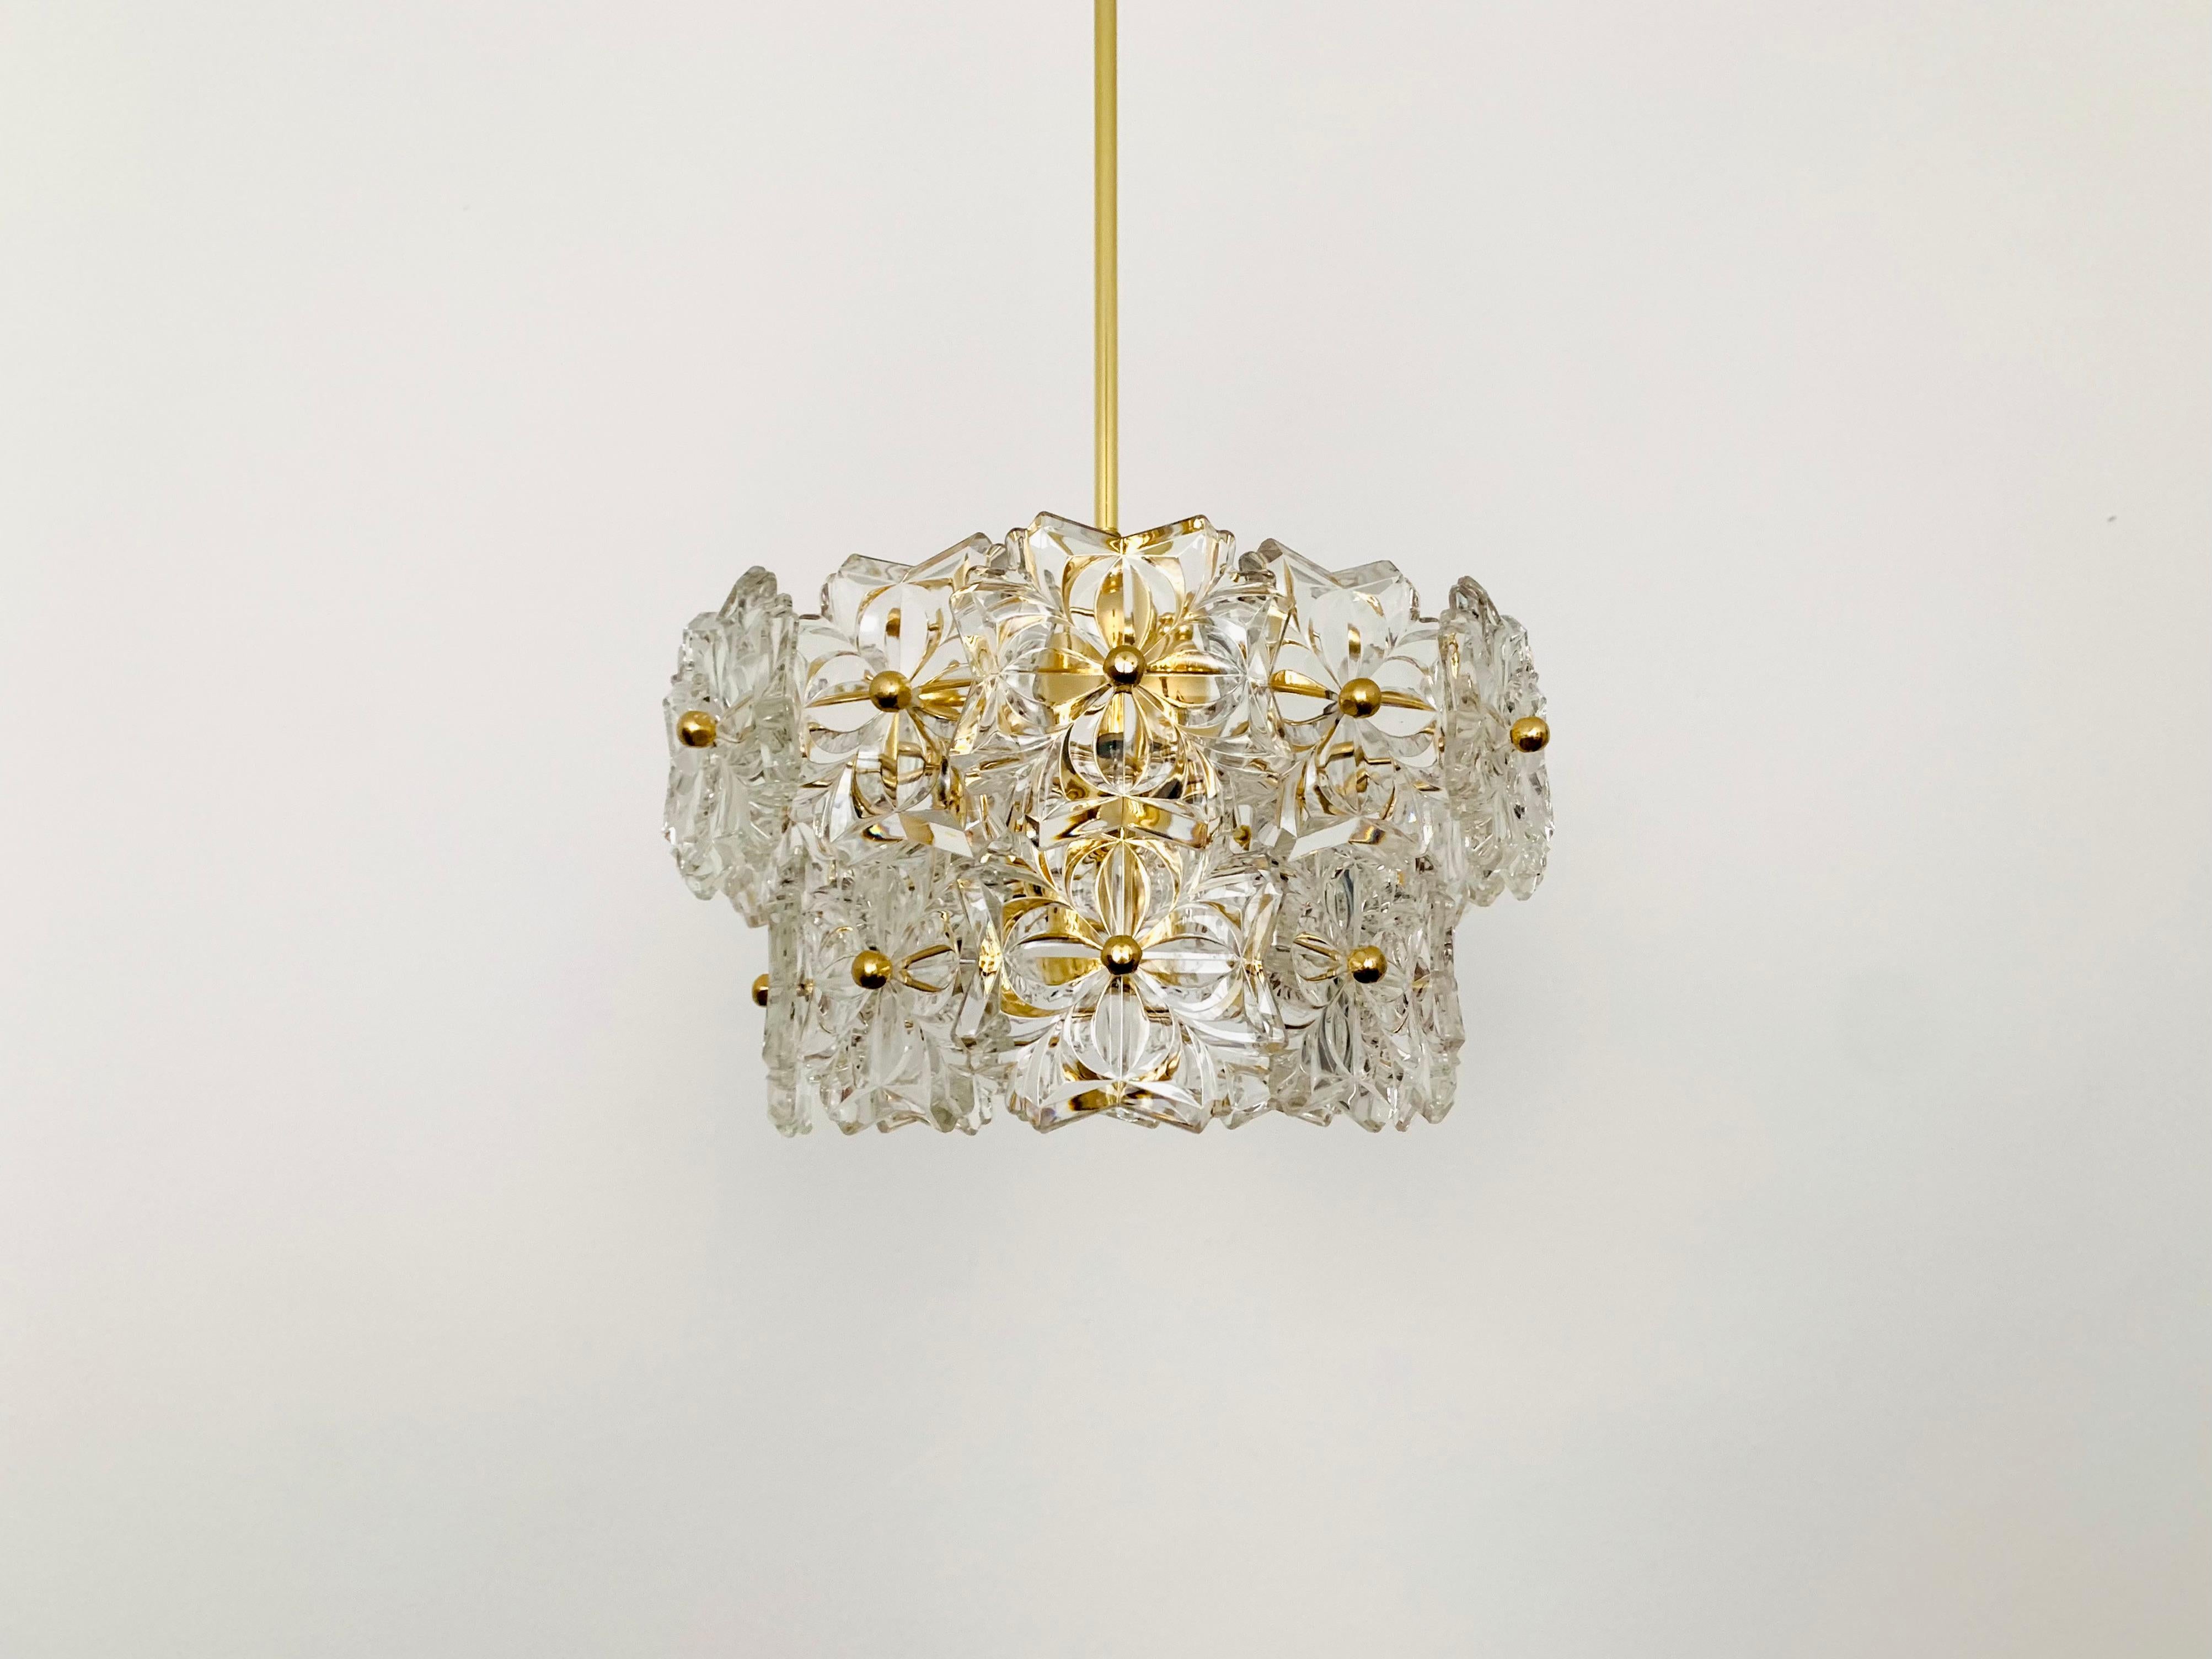 Stunningly beautiful and very high quality small chandelier from the 1960s.
The excellent workmanship and the very noble material impress at first glance.
Exceptionally beautiful design.
The lamp spreads a spectacular play of light in the